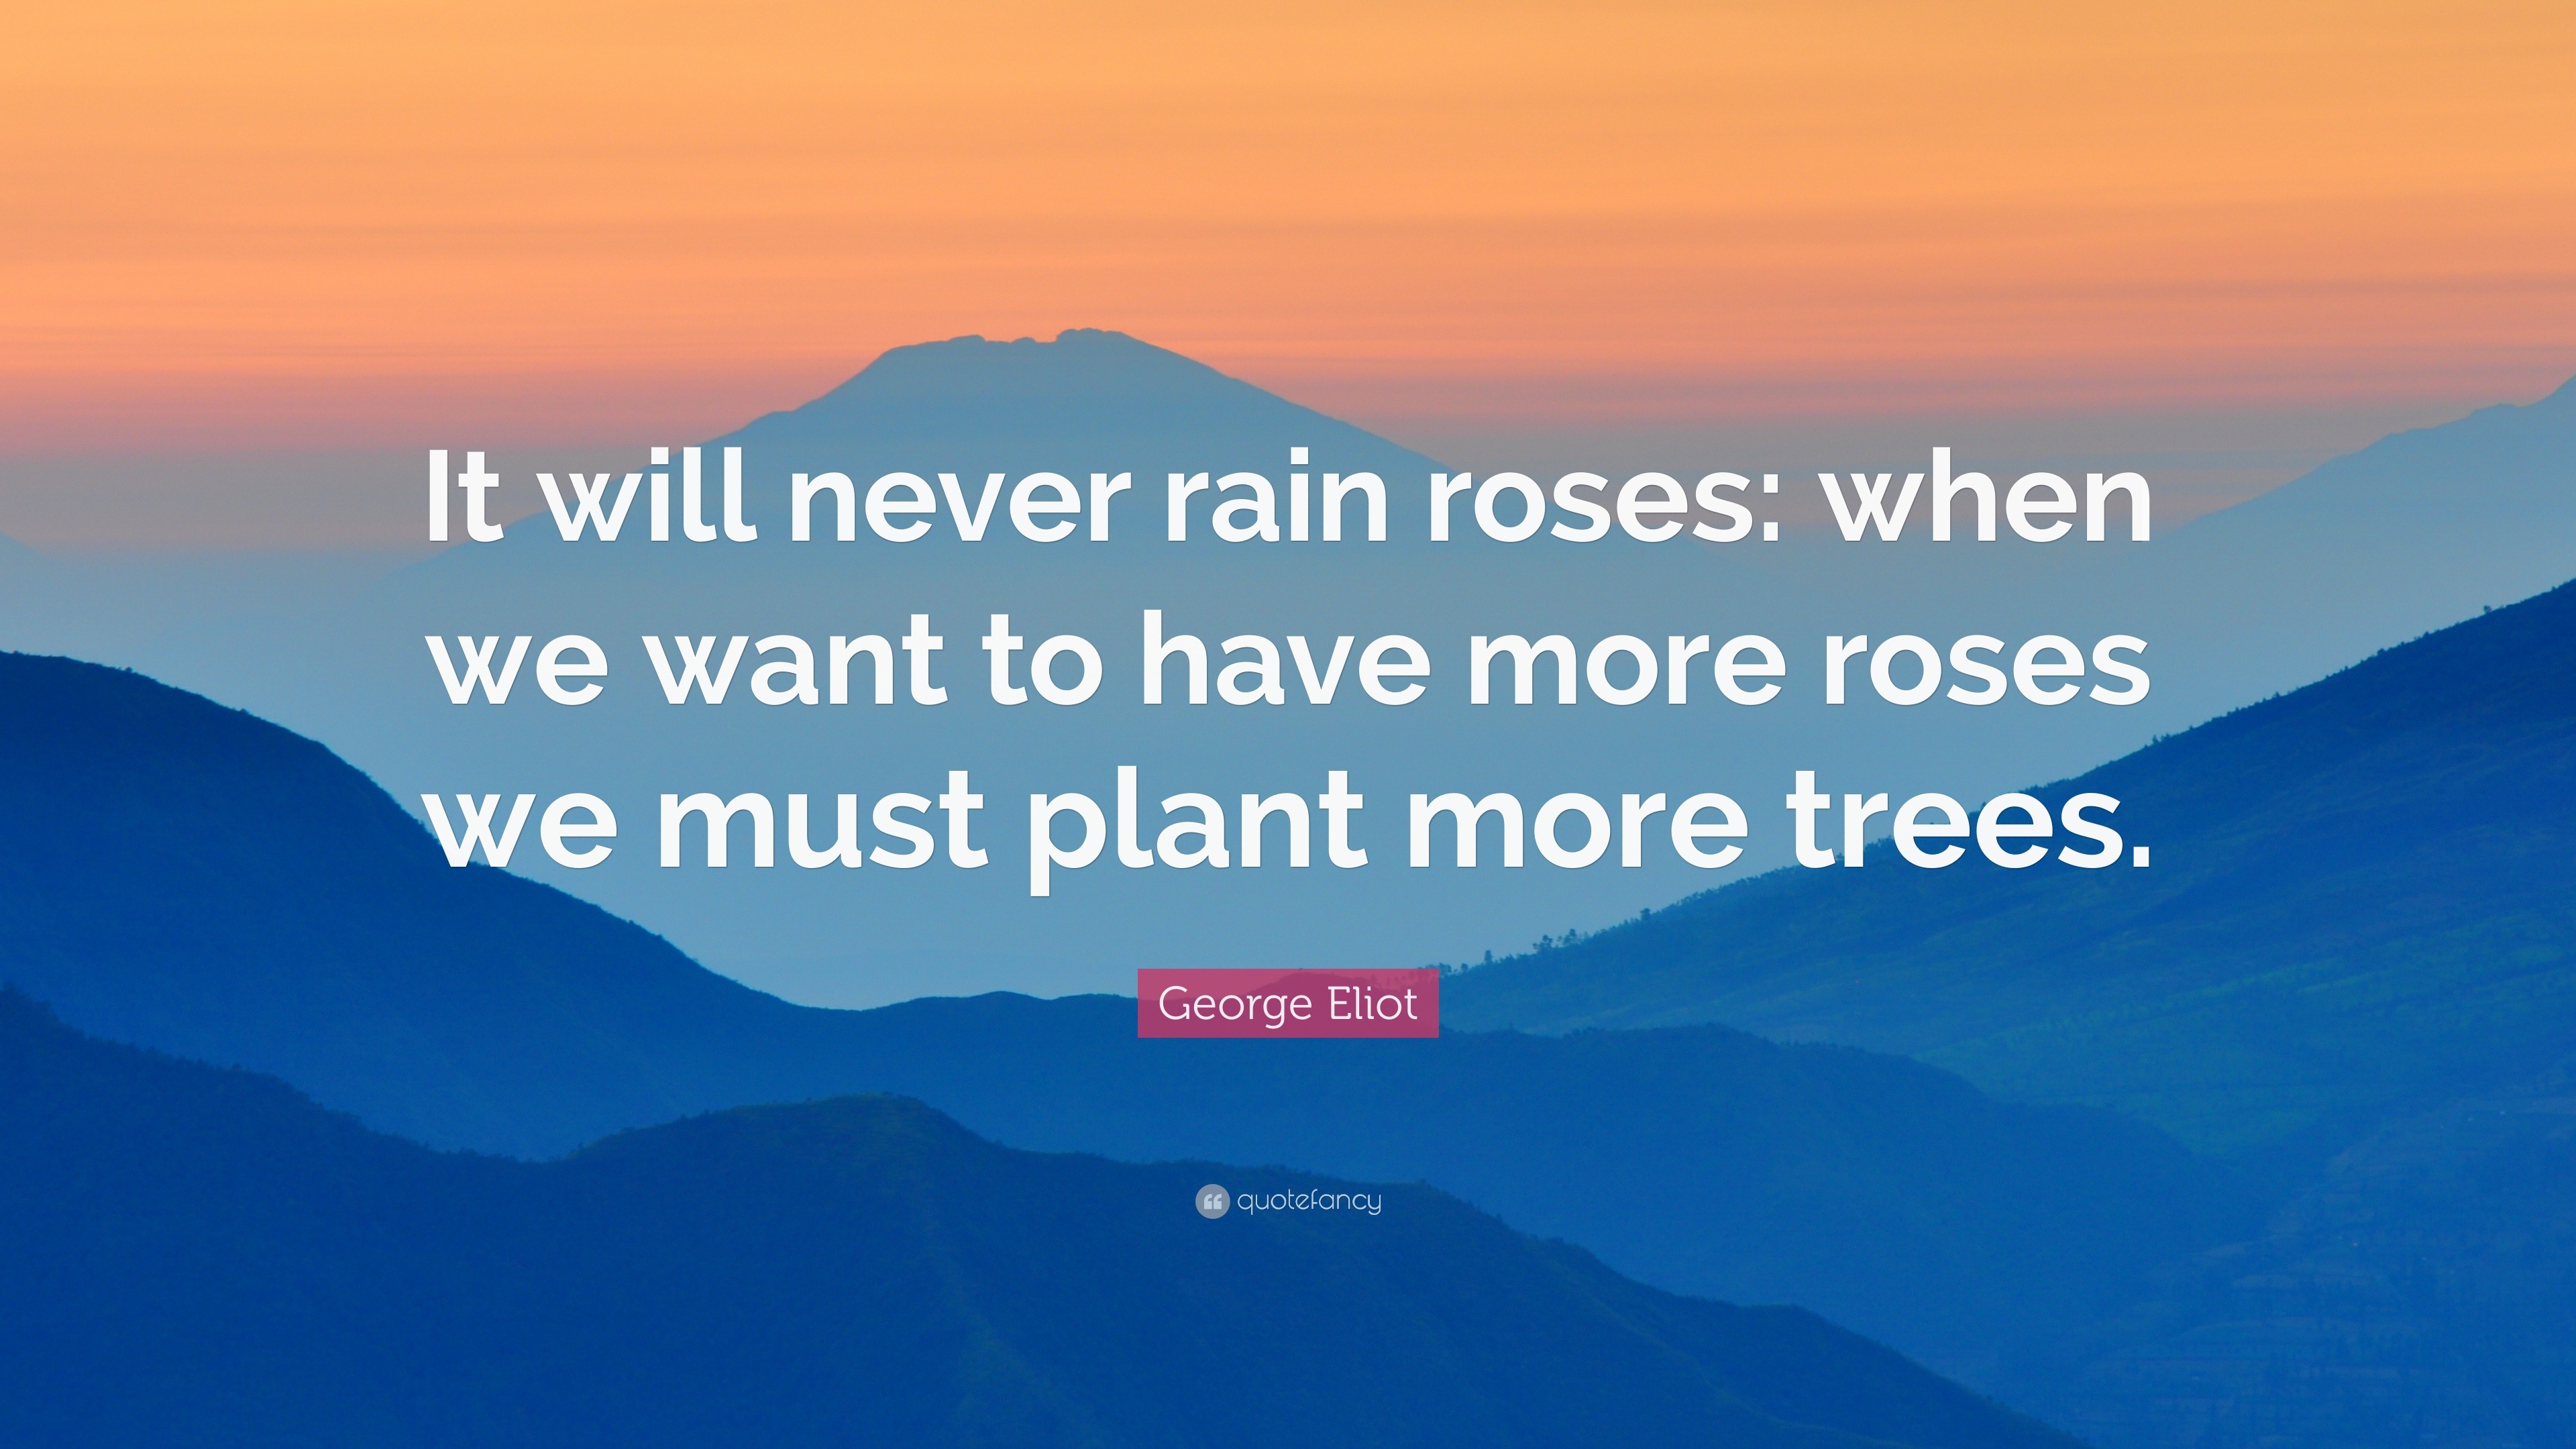 George Eliot Quote: “It will never rain roses: when we want to have ...